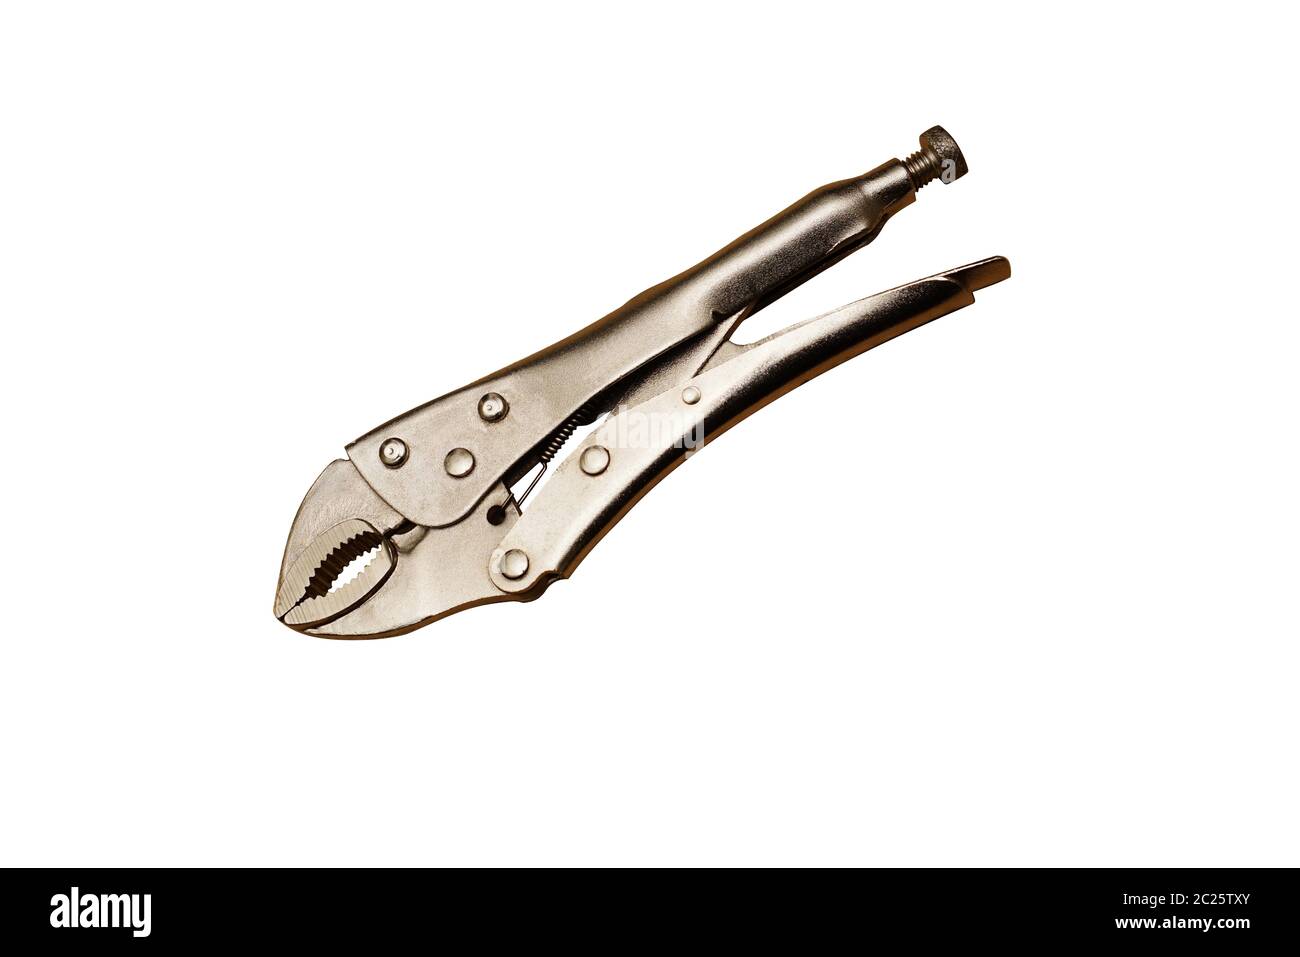 New locking pliers on a white background Stock Photo